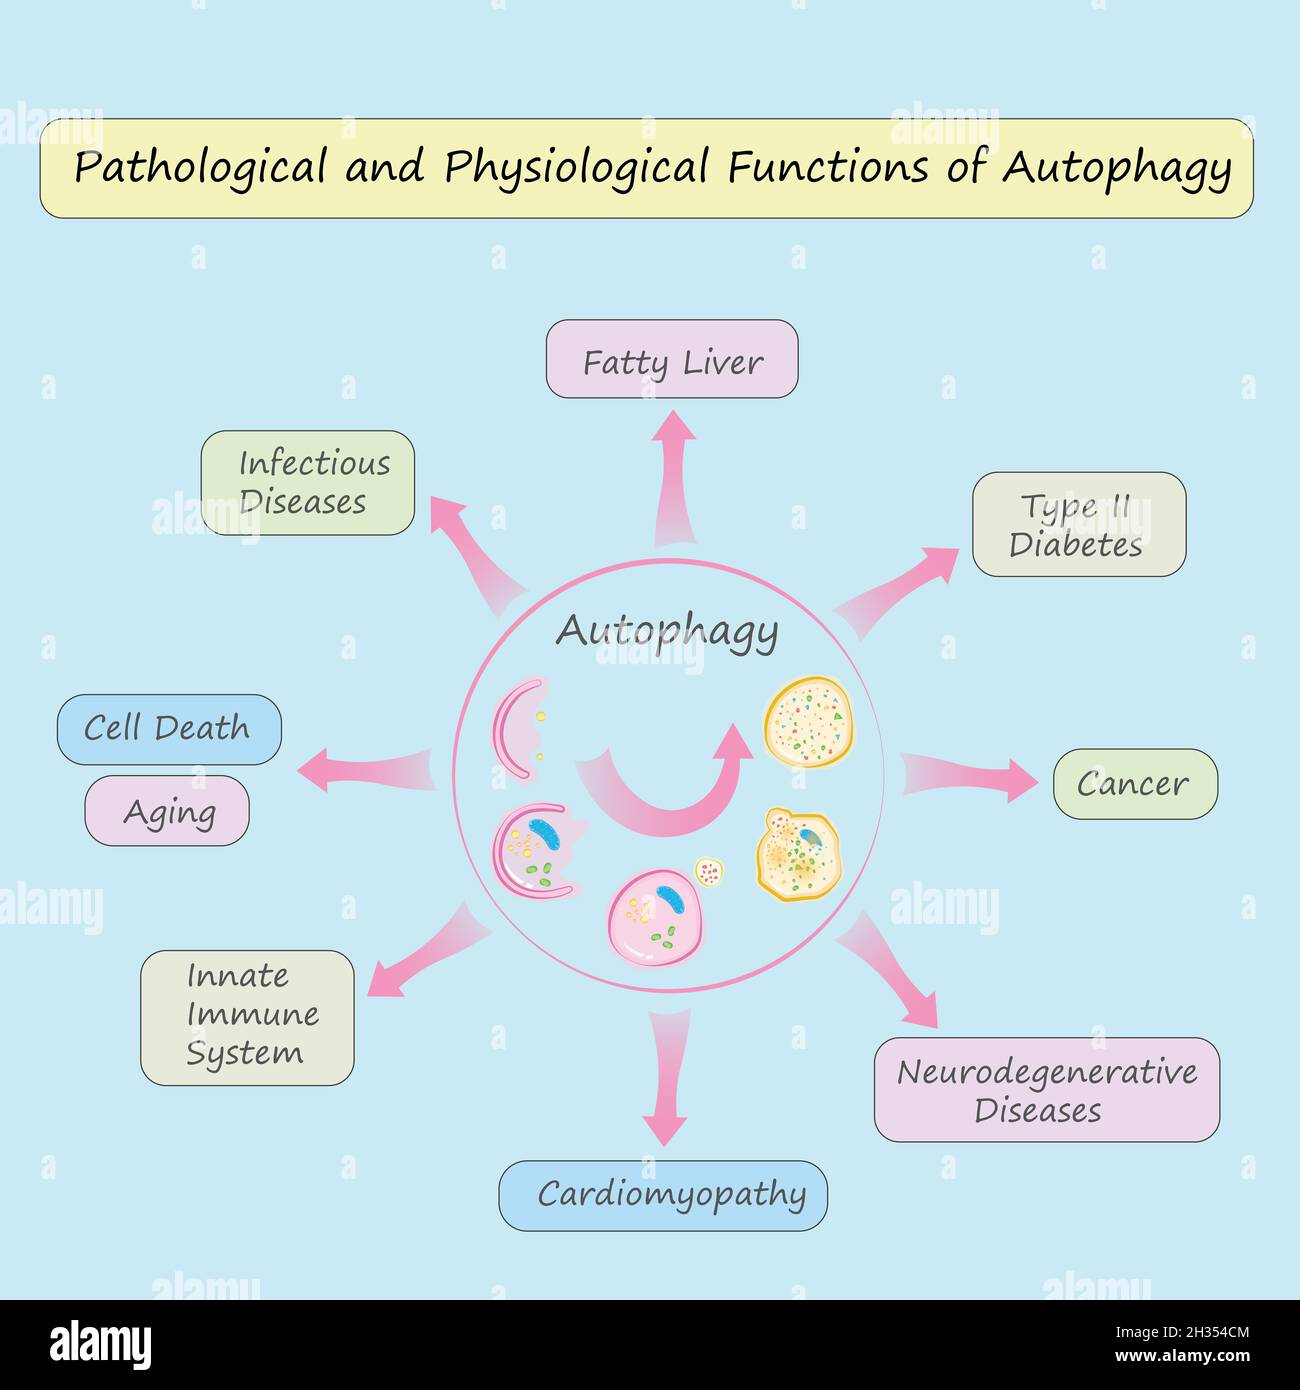 Pathological and Physiological Functions of Autophagy colorful illustration Stock Photo